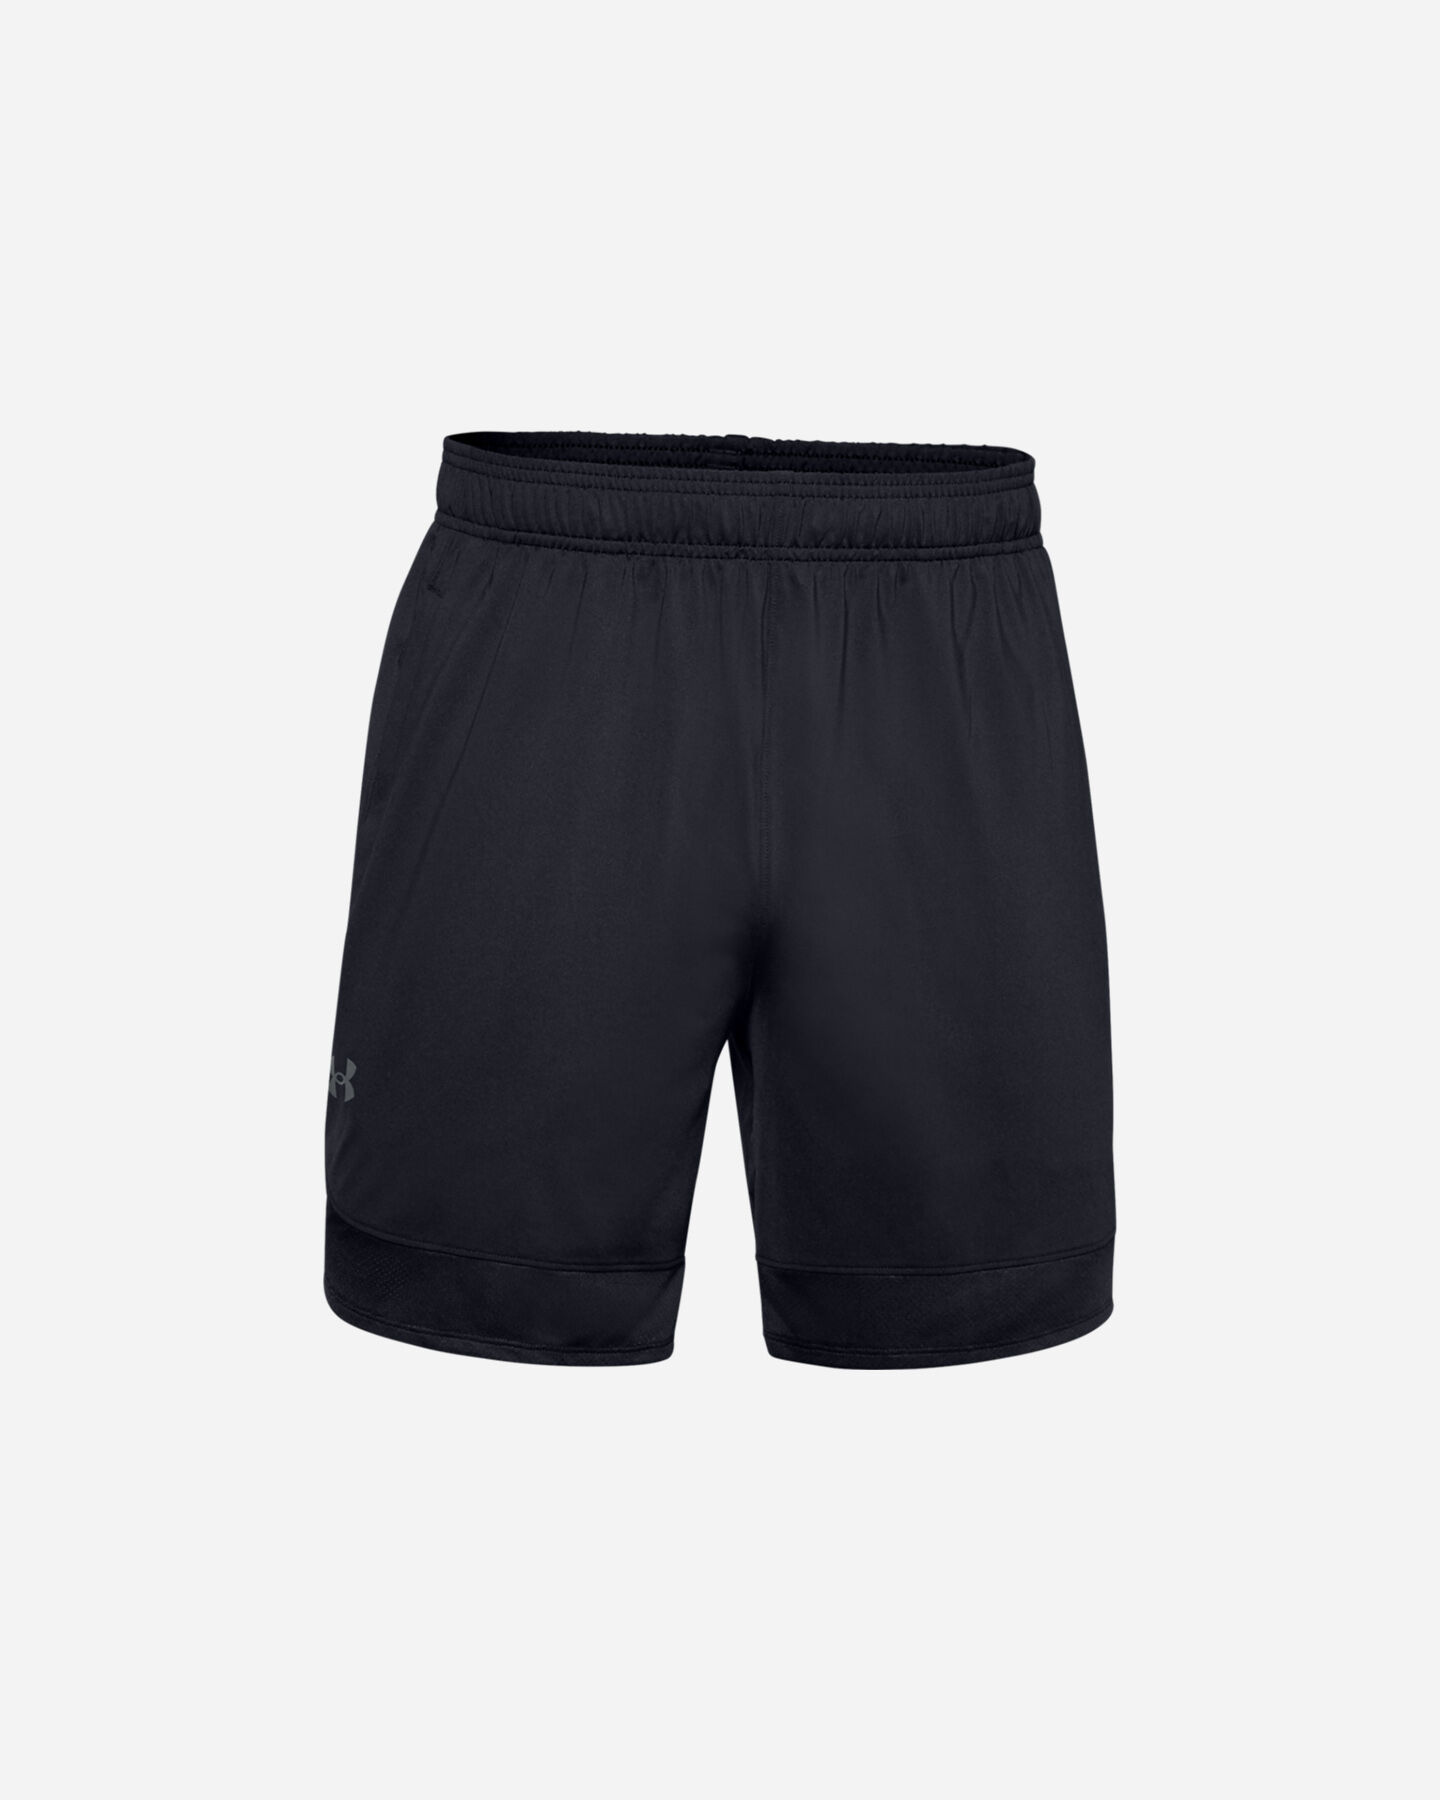  Pantalone training UNDER ARMOUR TRAINING STRETCH 7IN M S5229426|0001|SM scatto 0